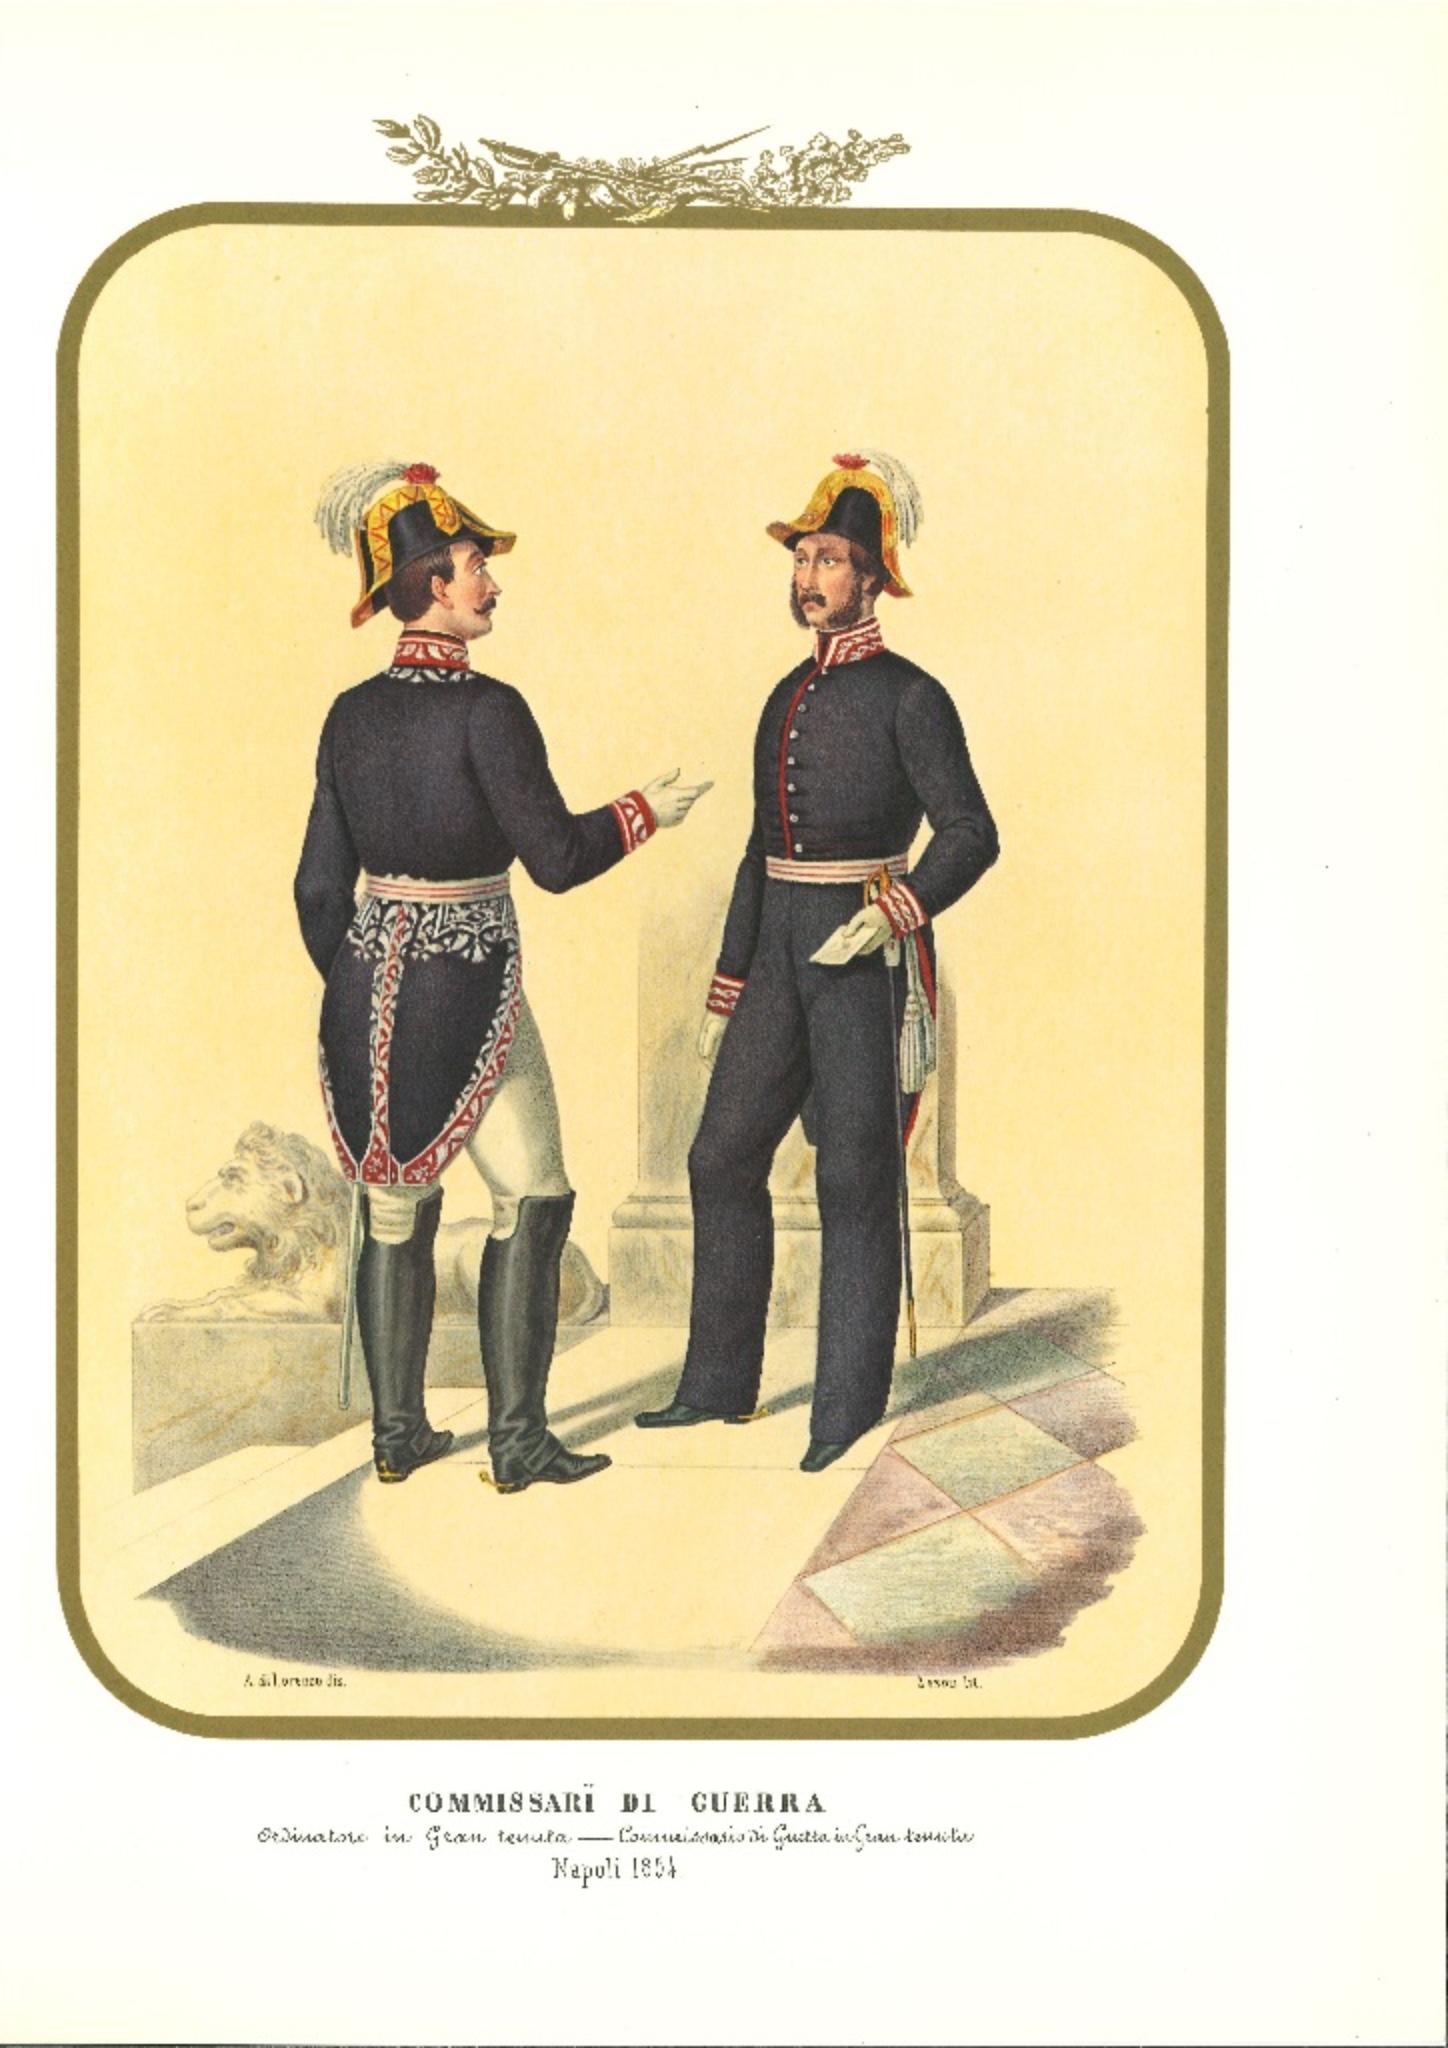 Commissioners of War is an original lithograph by Antonio Zezon. Naples 1854.

Interesting colored lithograph which describes the Commissioners of War: in the lithograph there are, in great estate, a Officer Commander and a Commissioner of War.

In